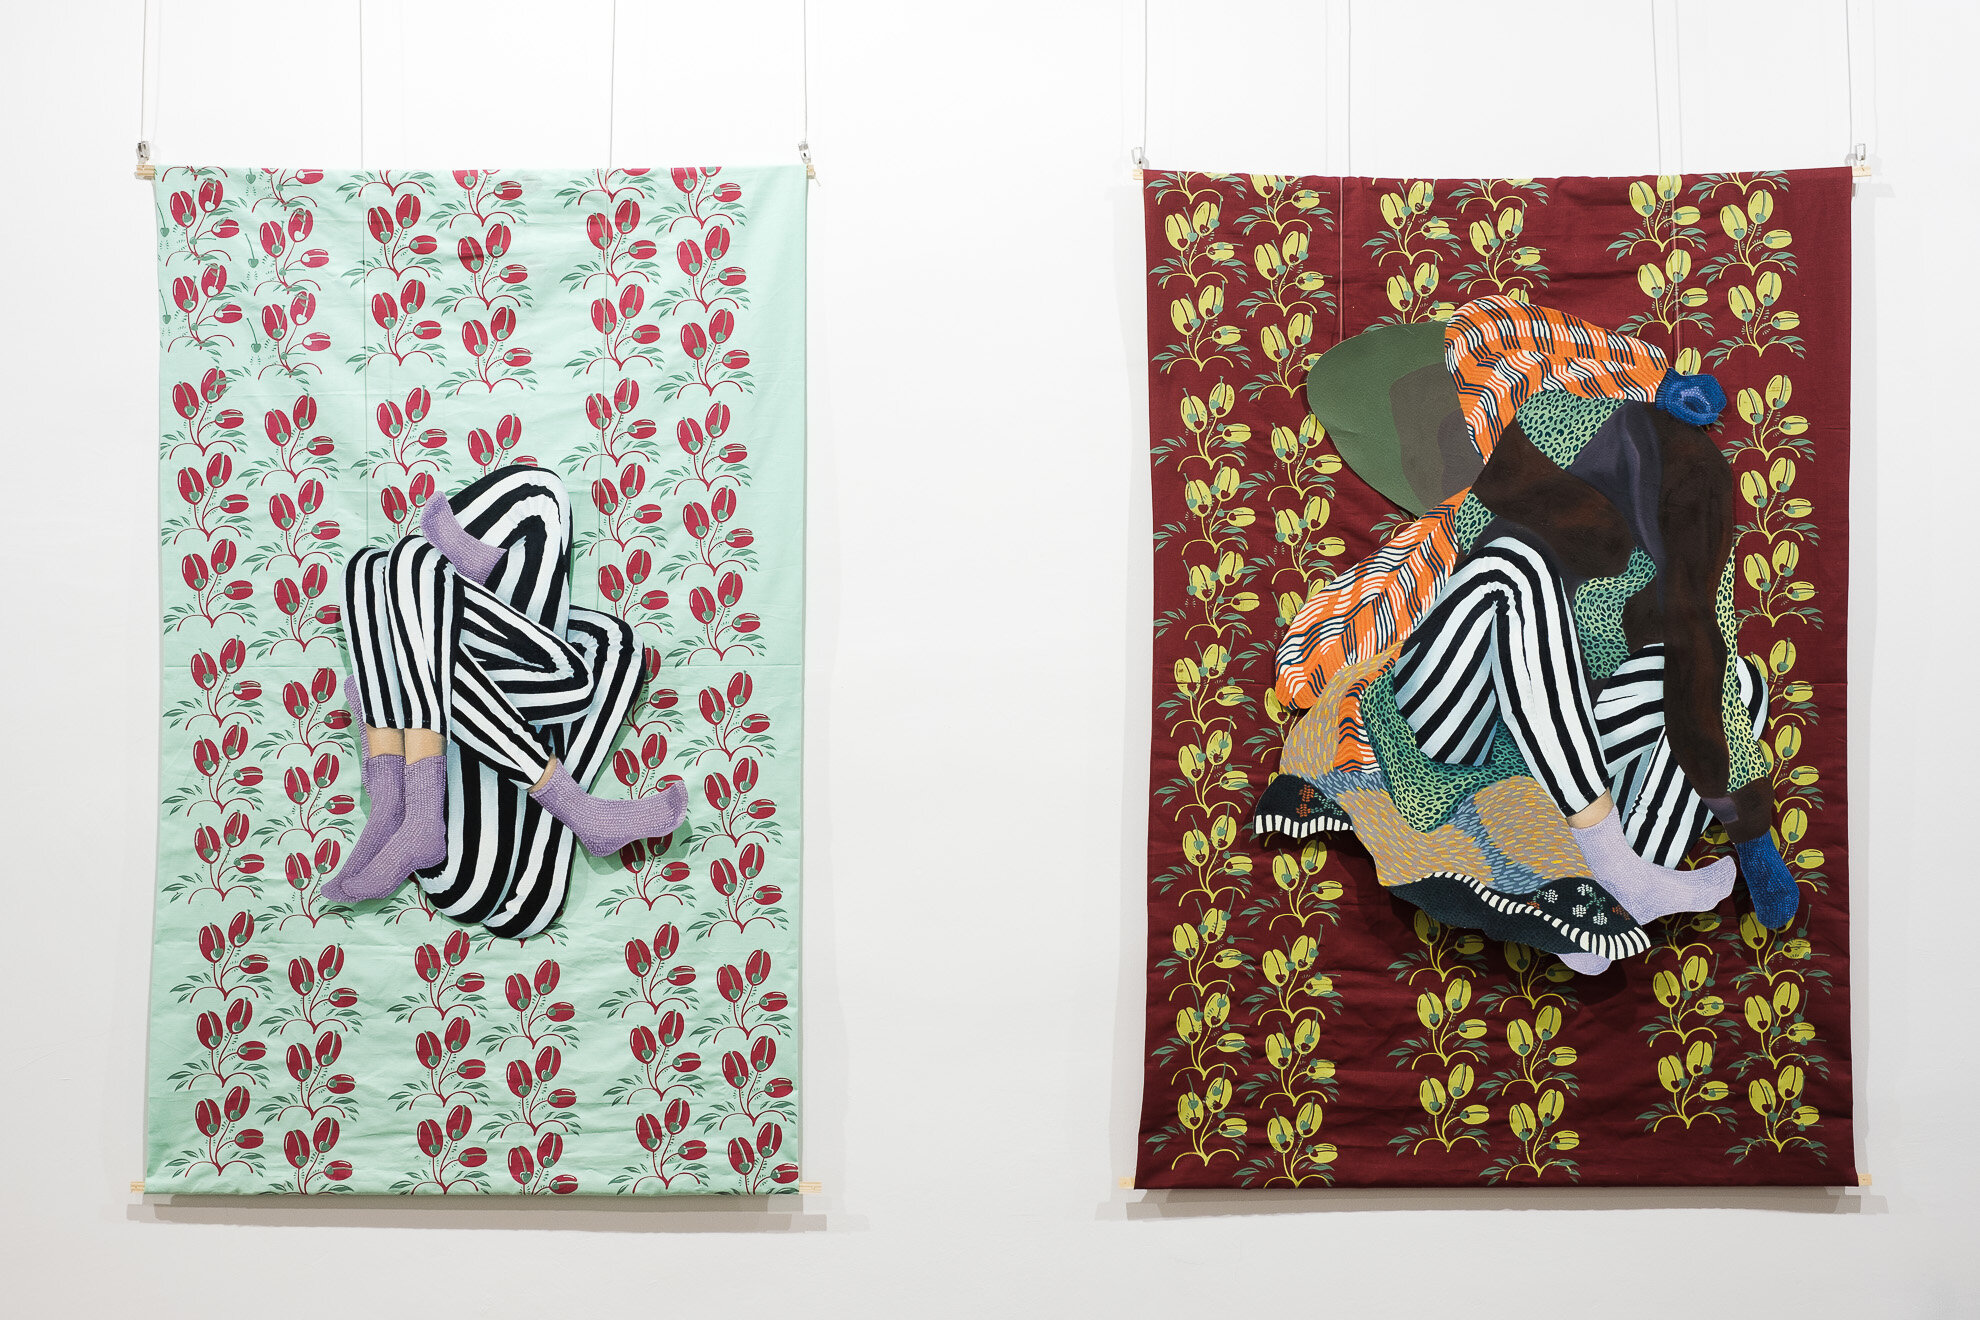  (L)  Eva , 2019, oil on canvas and screenprinting on cotton, 100 x 140 cm  (R)  Legs , 2019, oil on canvas and screenprinting on cotton, 100 x 140 cm 